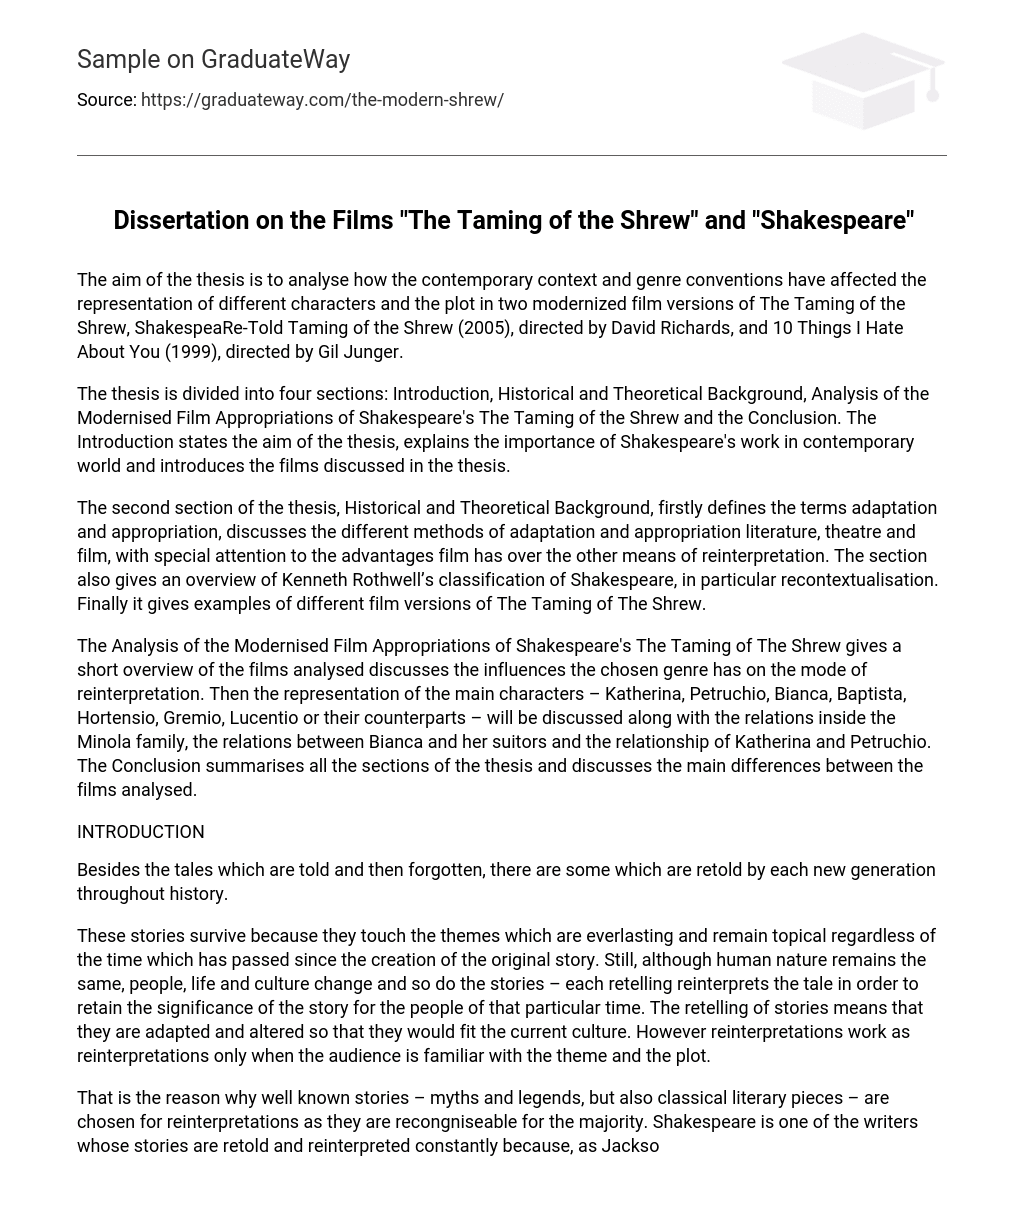 Dissertation on the Films “The Taming of the Shrew” and “Shakespeare”